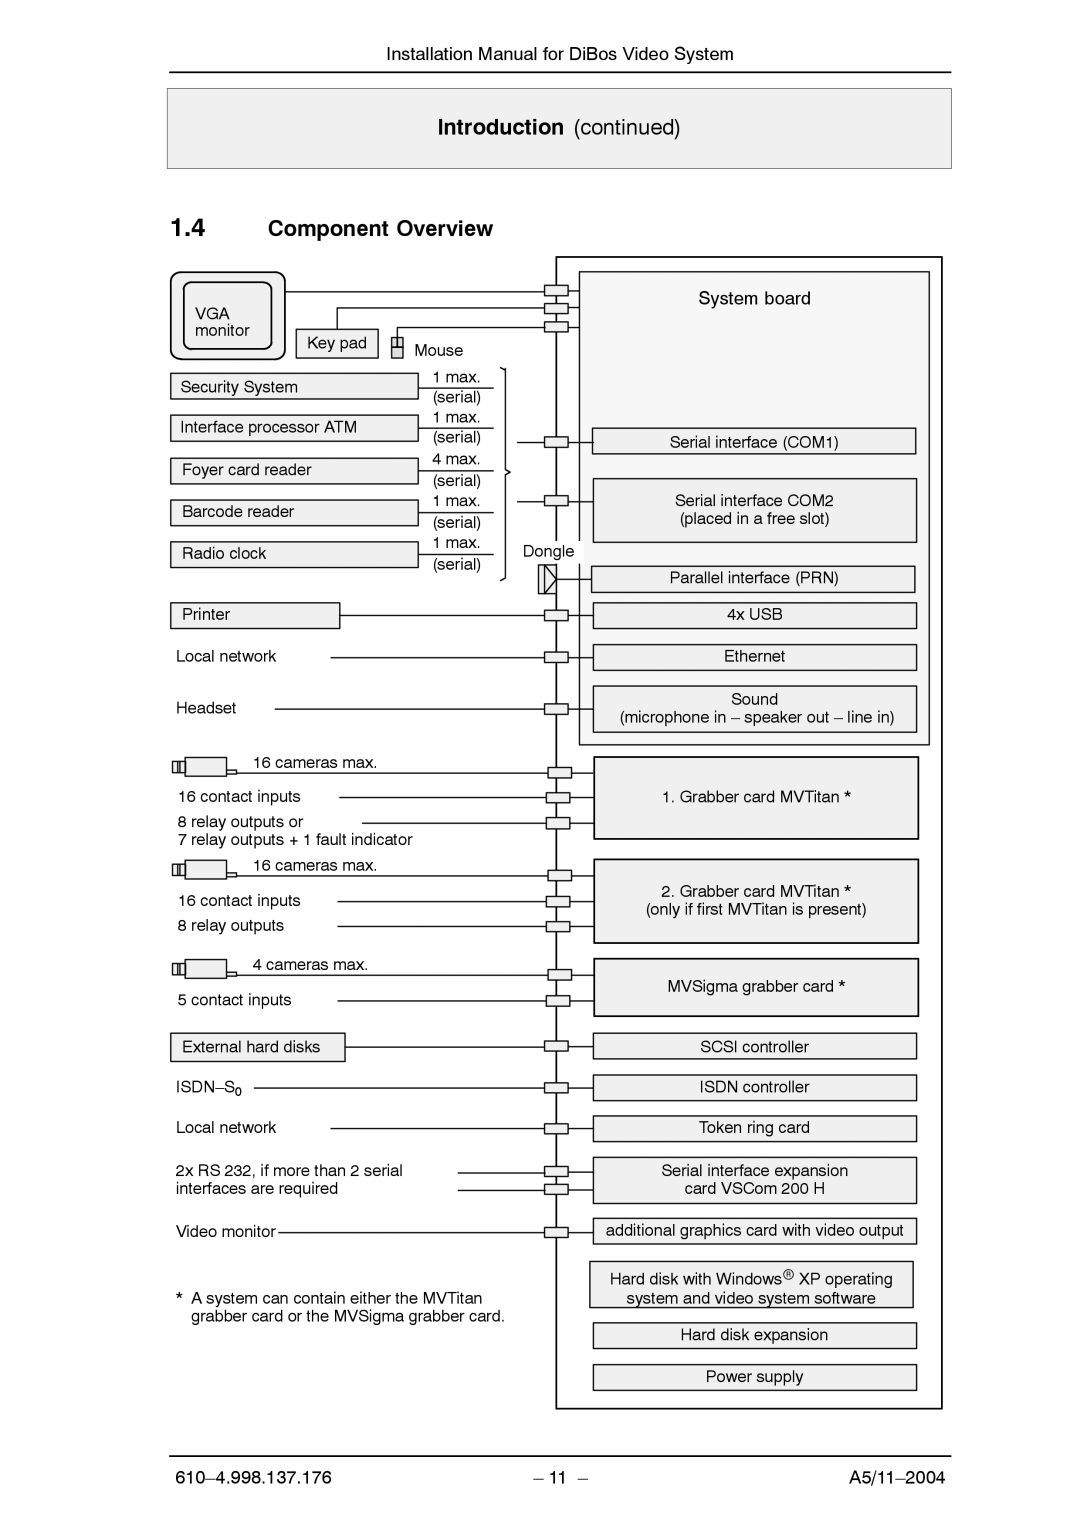 Bosch Appliances A5 installation manual Introduction Component Overview, System board 